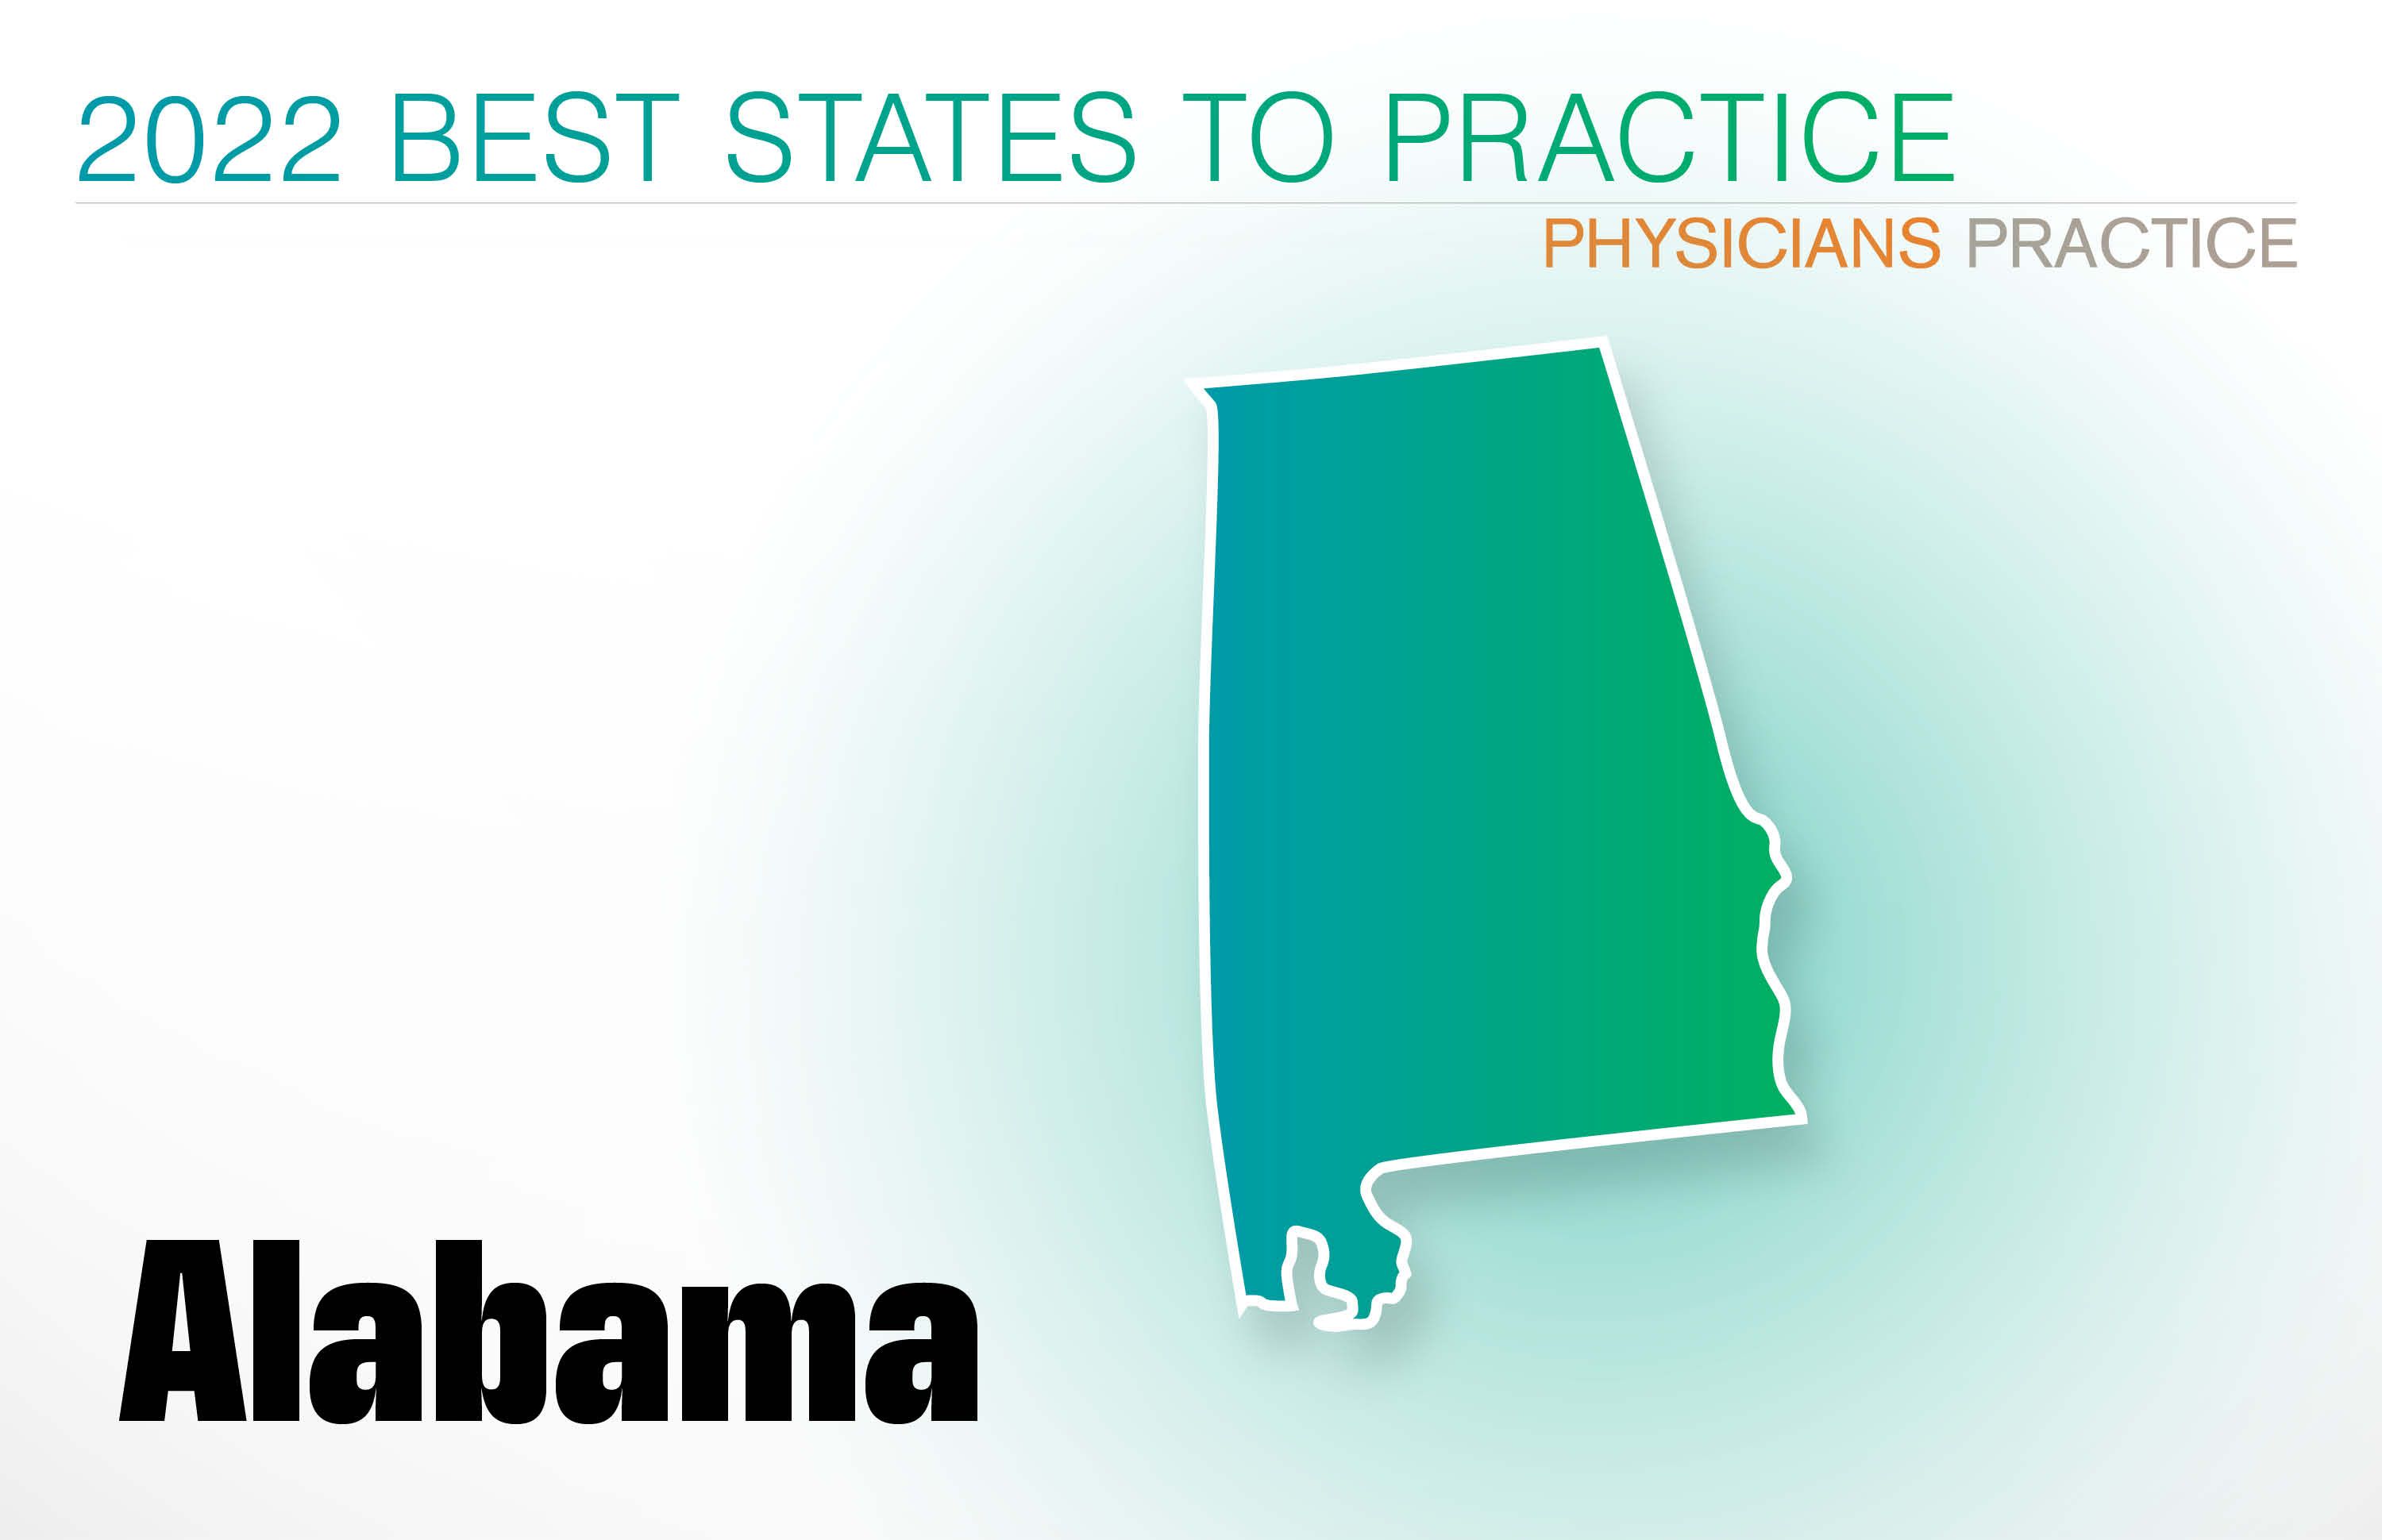 #11 Alabama Rankings: Cost of living: 4 Physician density: 8 Amount of state business taxes collected: 39 Average malpractice insurance rates: 9 Quality of life: 22 GPCI: 25